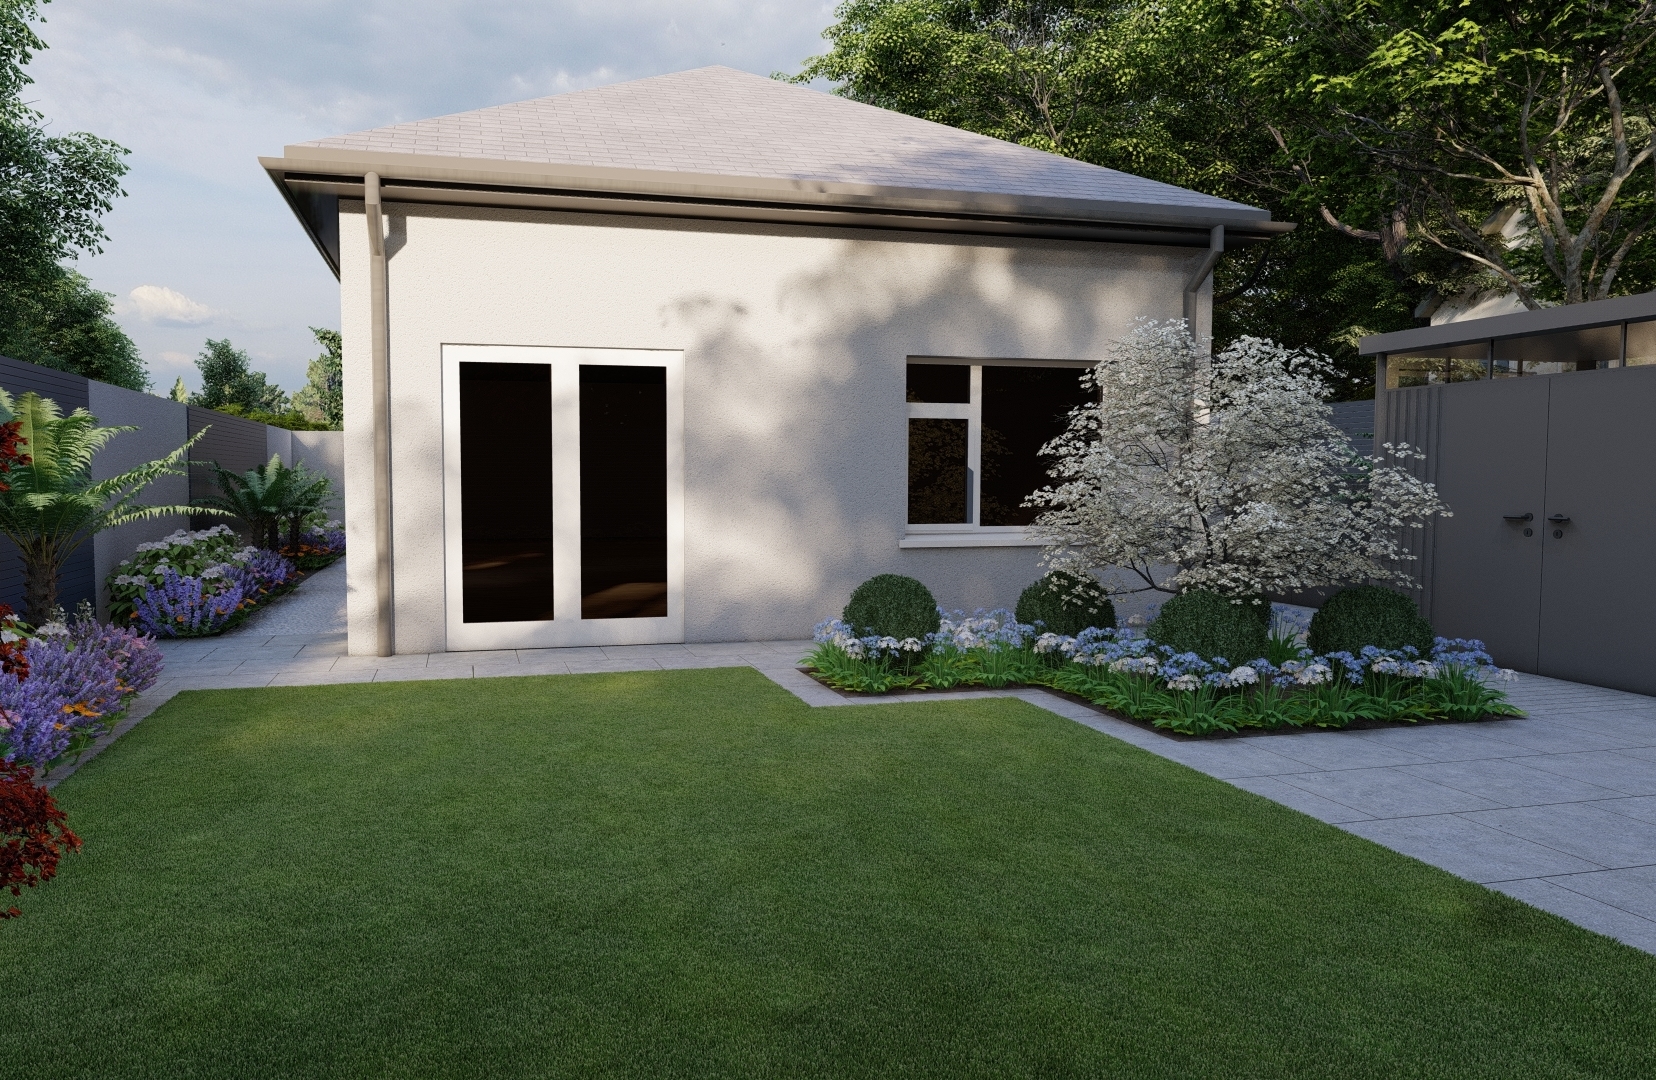 Design Visuals for a Family Garden in Clontarf, Dublin 3 featuring bespoke horizontal timber screening, natural grass lawn, limestone paving, Biohort Garden Shed and mixed low maintenance  planting.